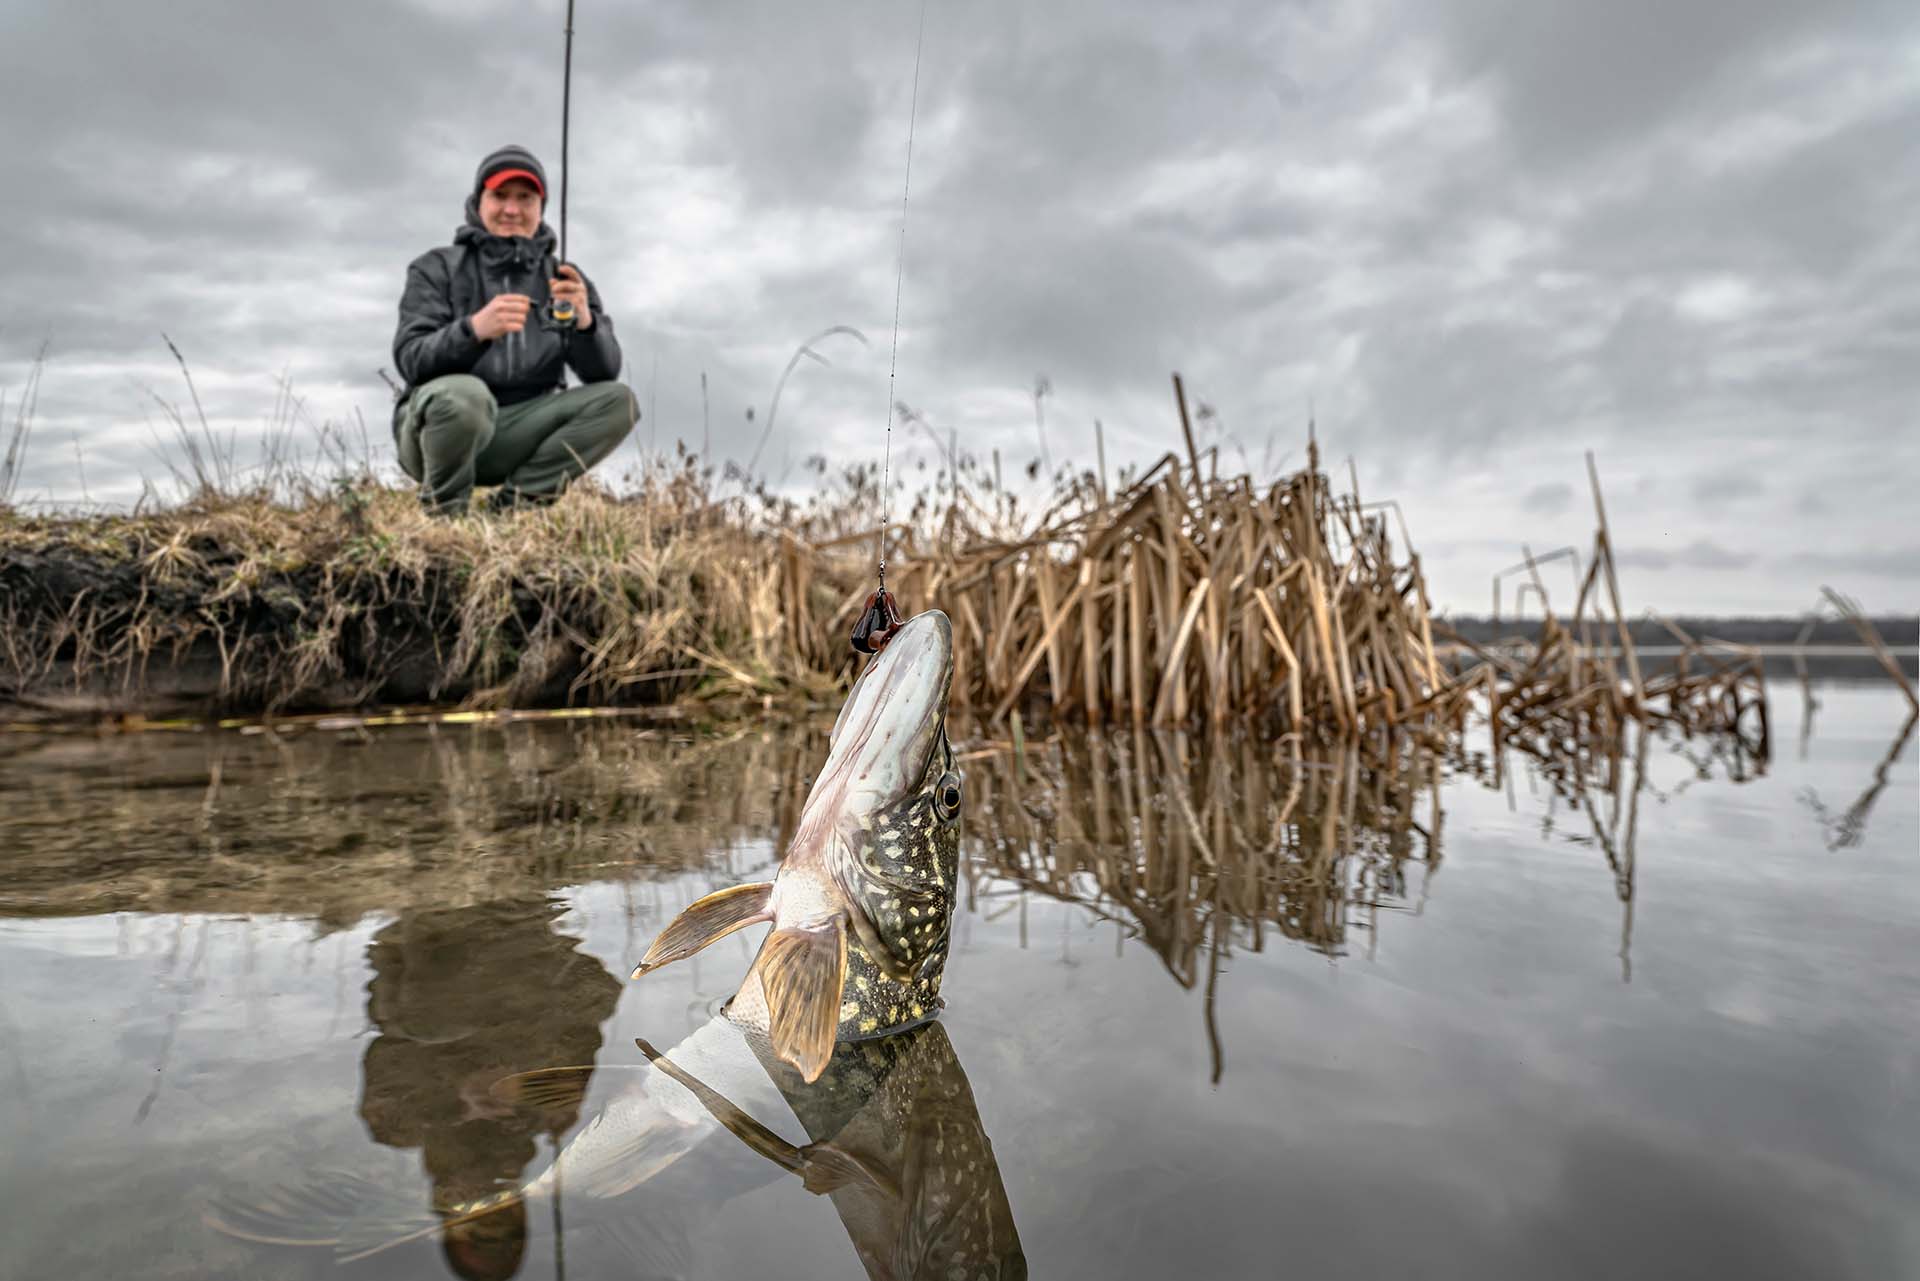 Fisherman pulling a muskie fish out of the water on a cloudy day